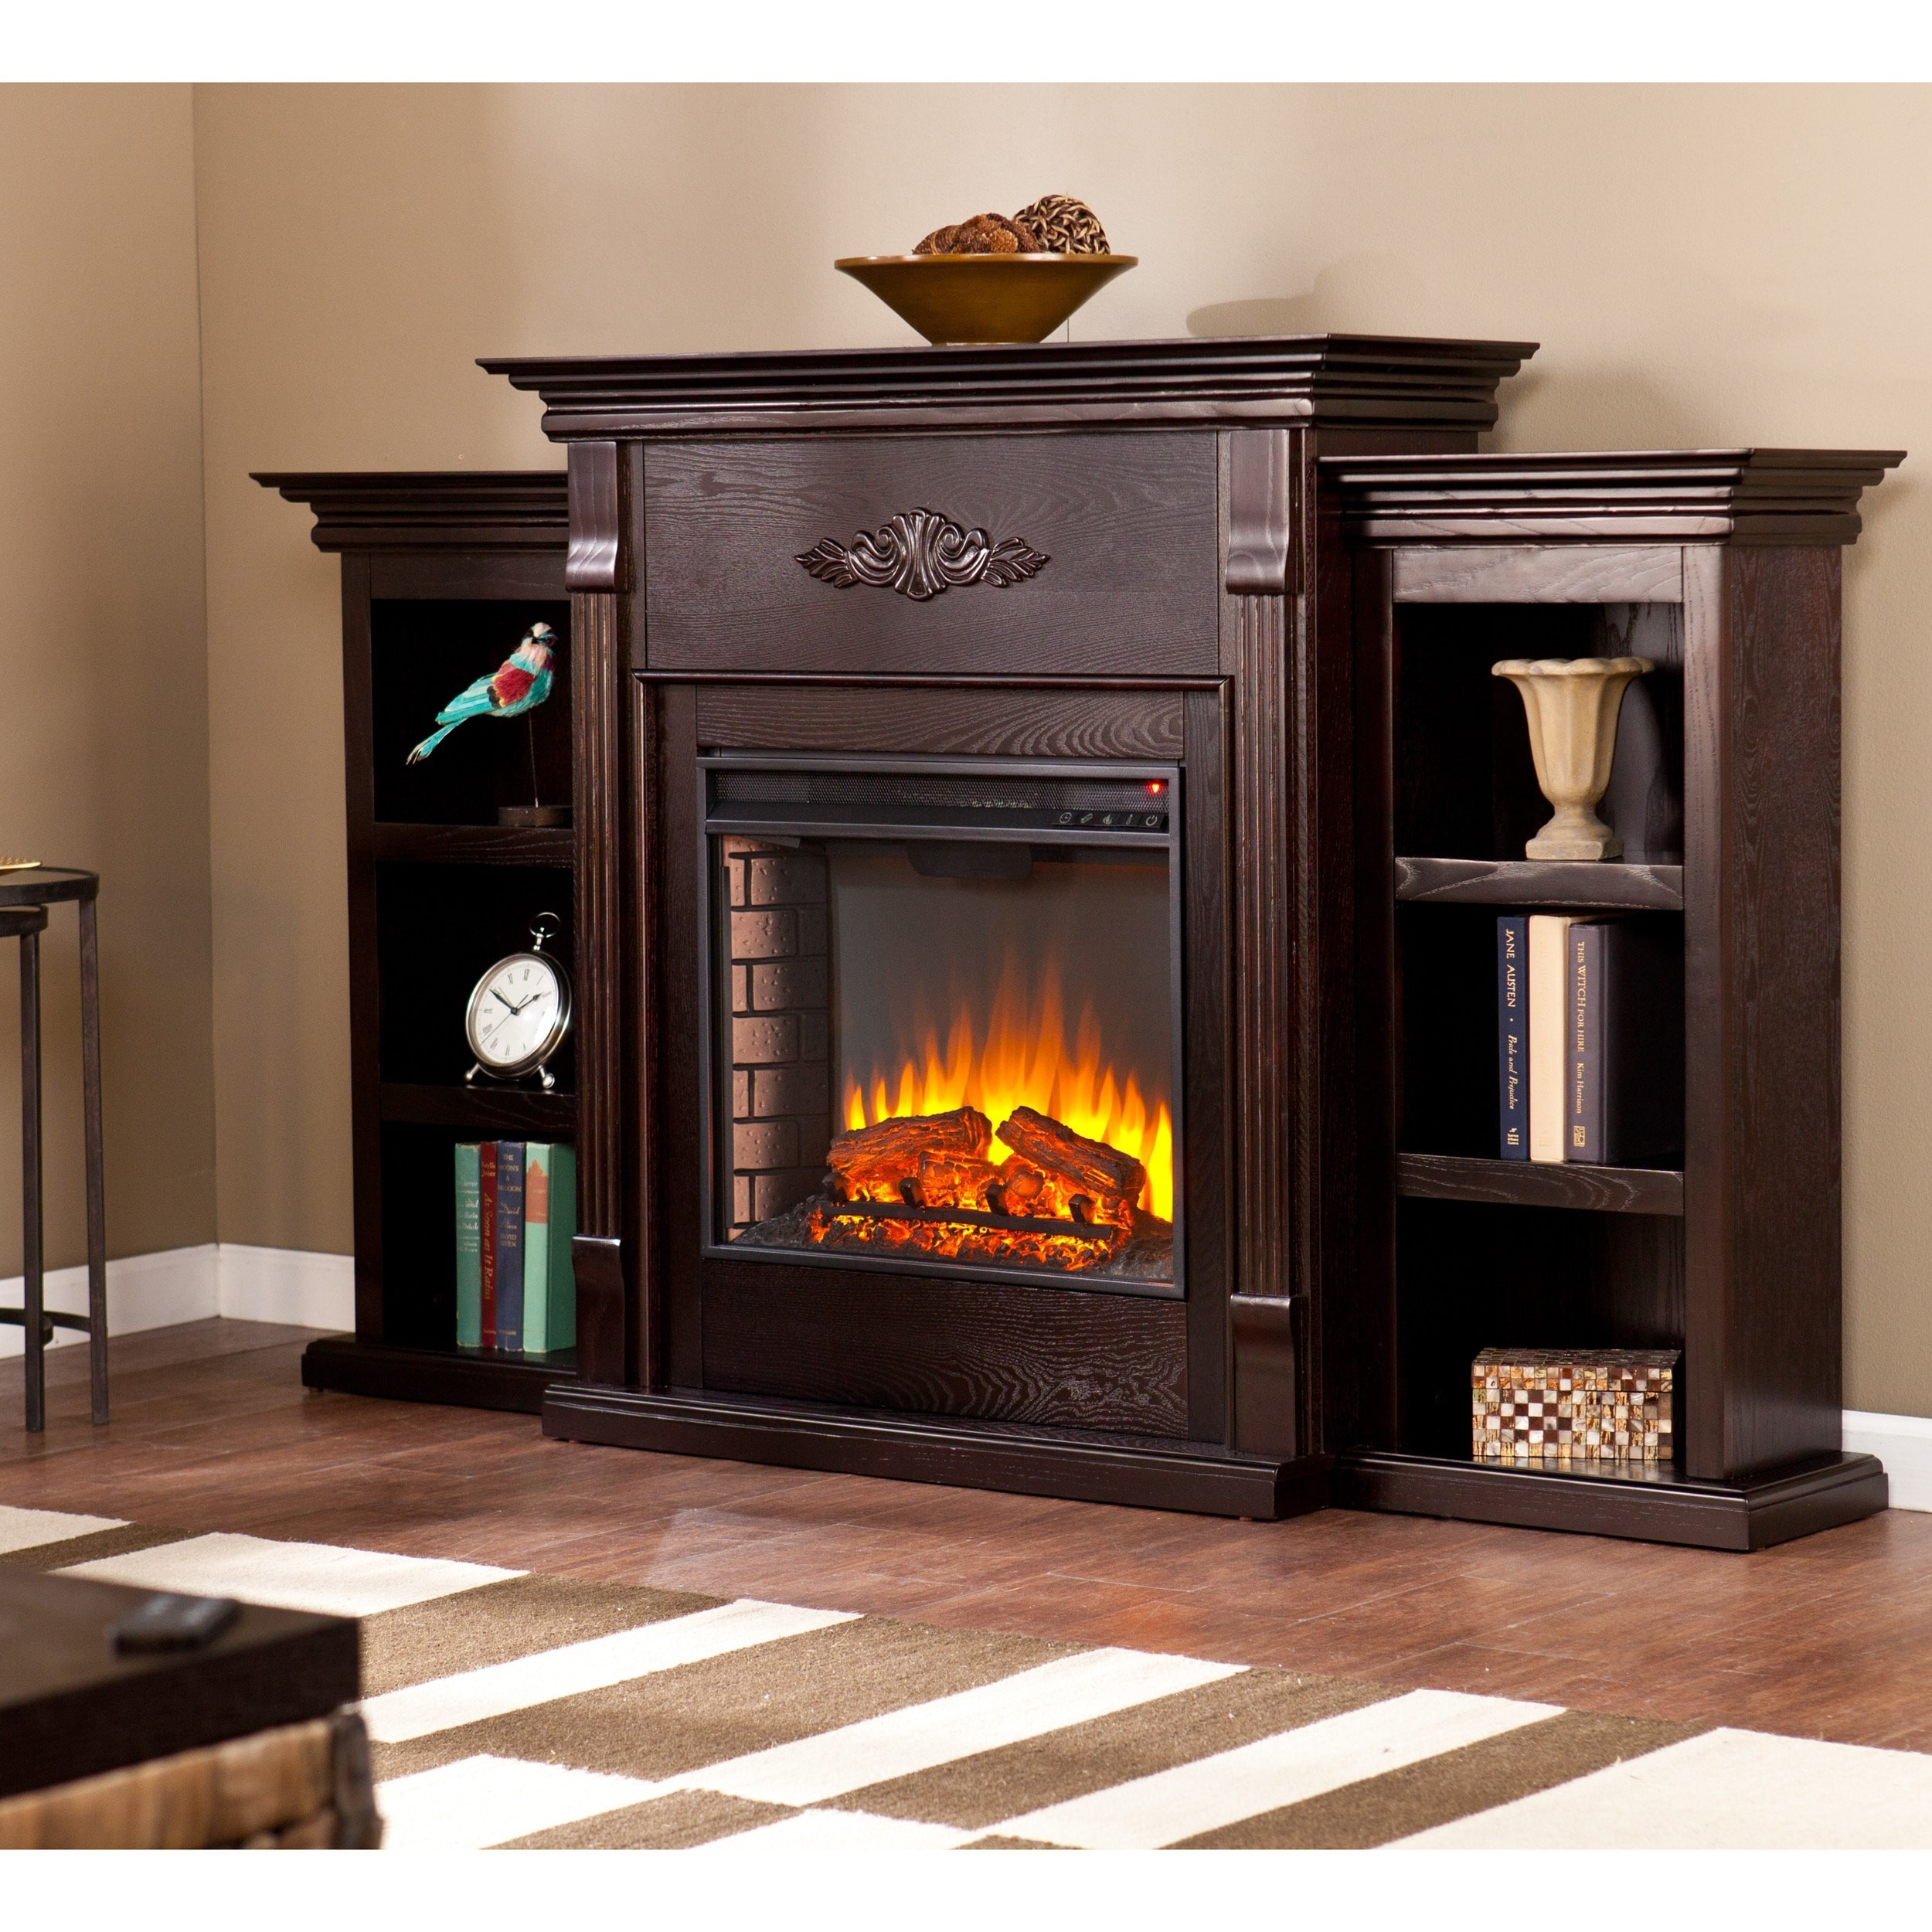 Media Center With Electric Fireplace
 70 Inch TV Stand With Fireplace Media Console Electric